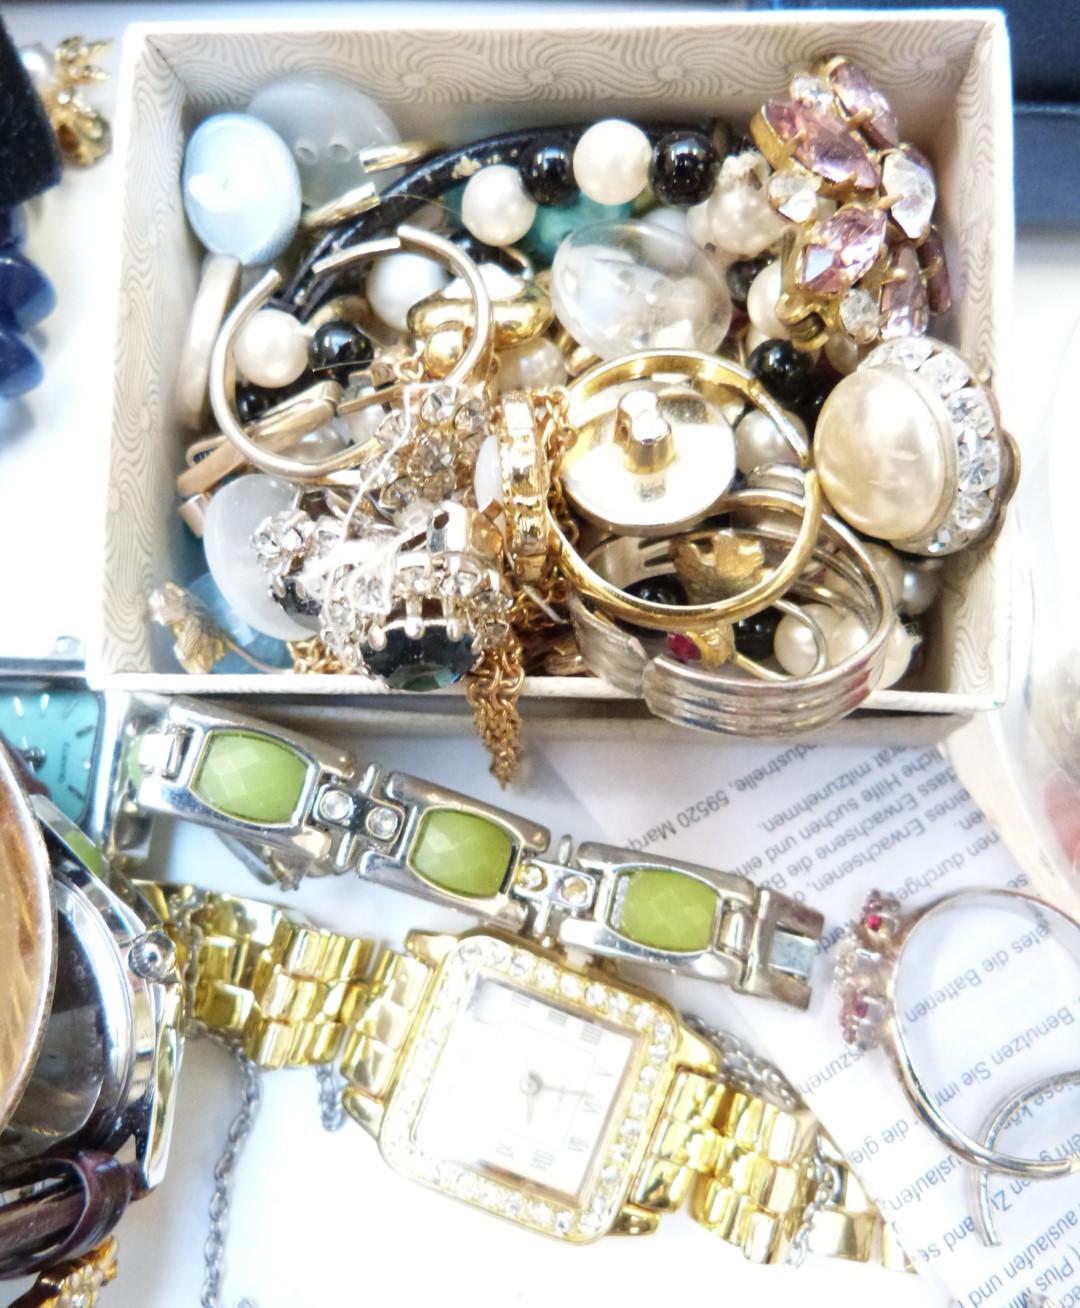 A collection of jewellery including vintage brooches, vintage earrings, beads, necklaces, etc - Image 6 of 11